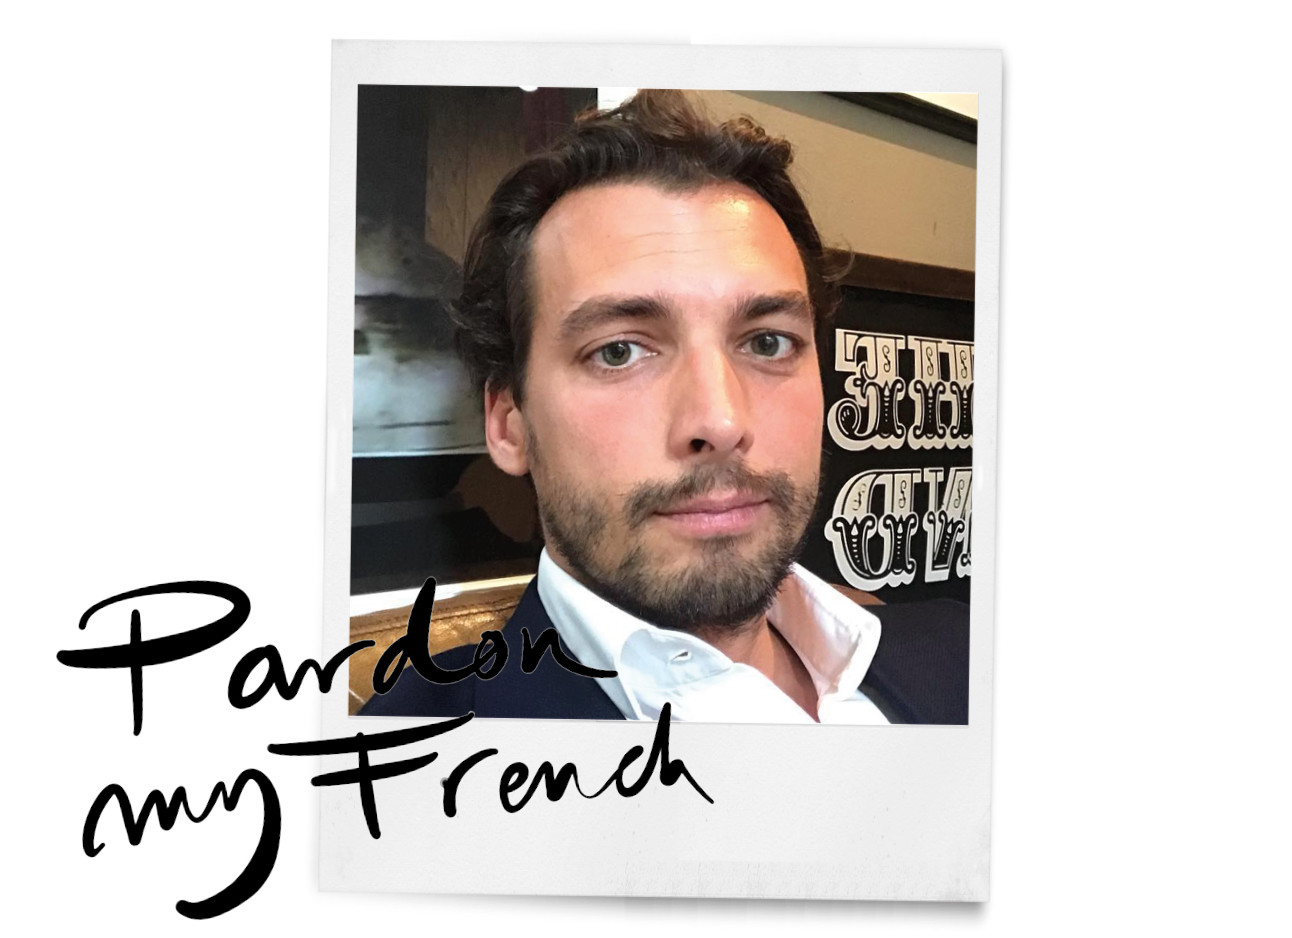 thierry baudet selfie witte blouse donker pak pardon my french